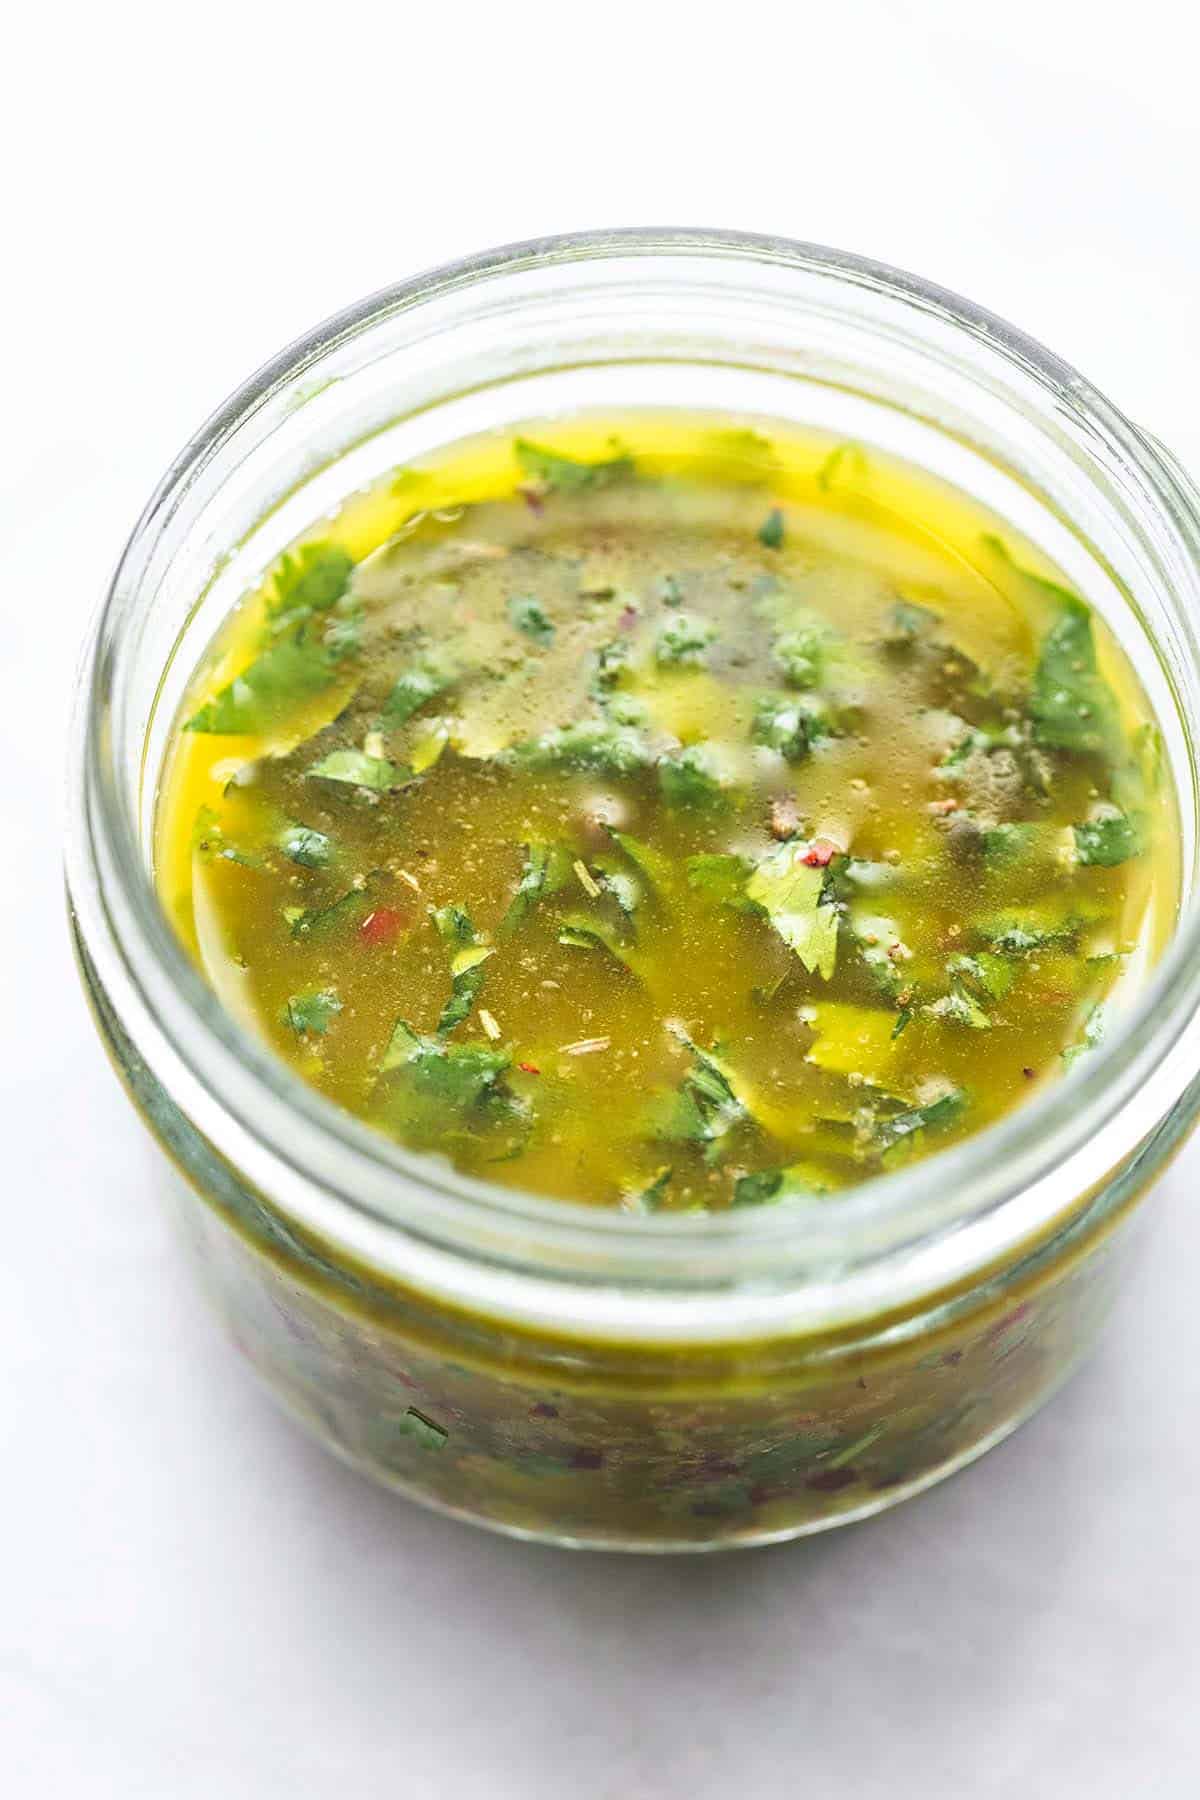 cilantro lime marinade in a clear jar on a marble table.